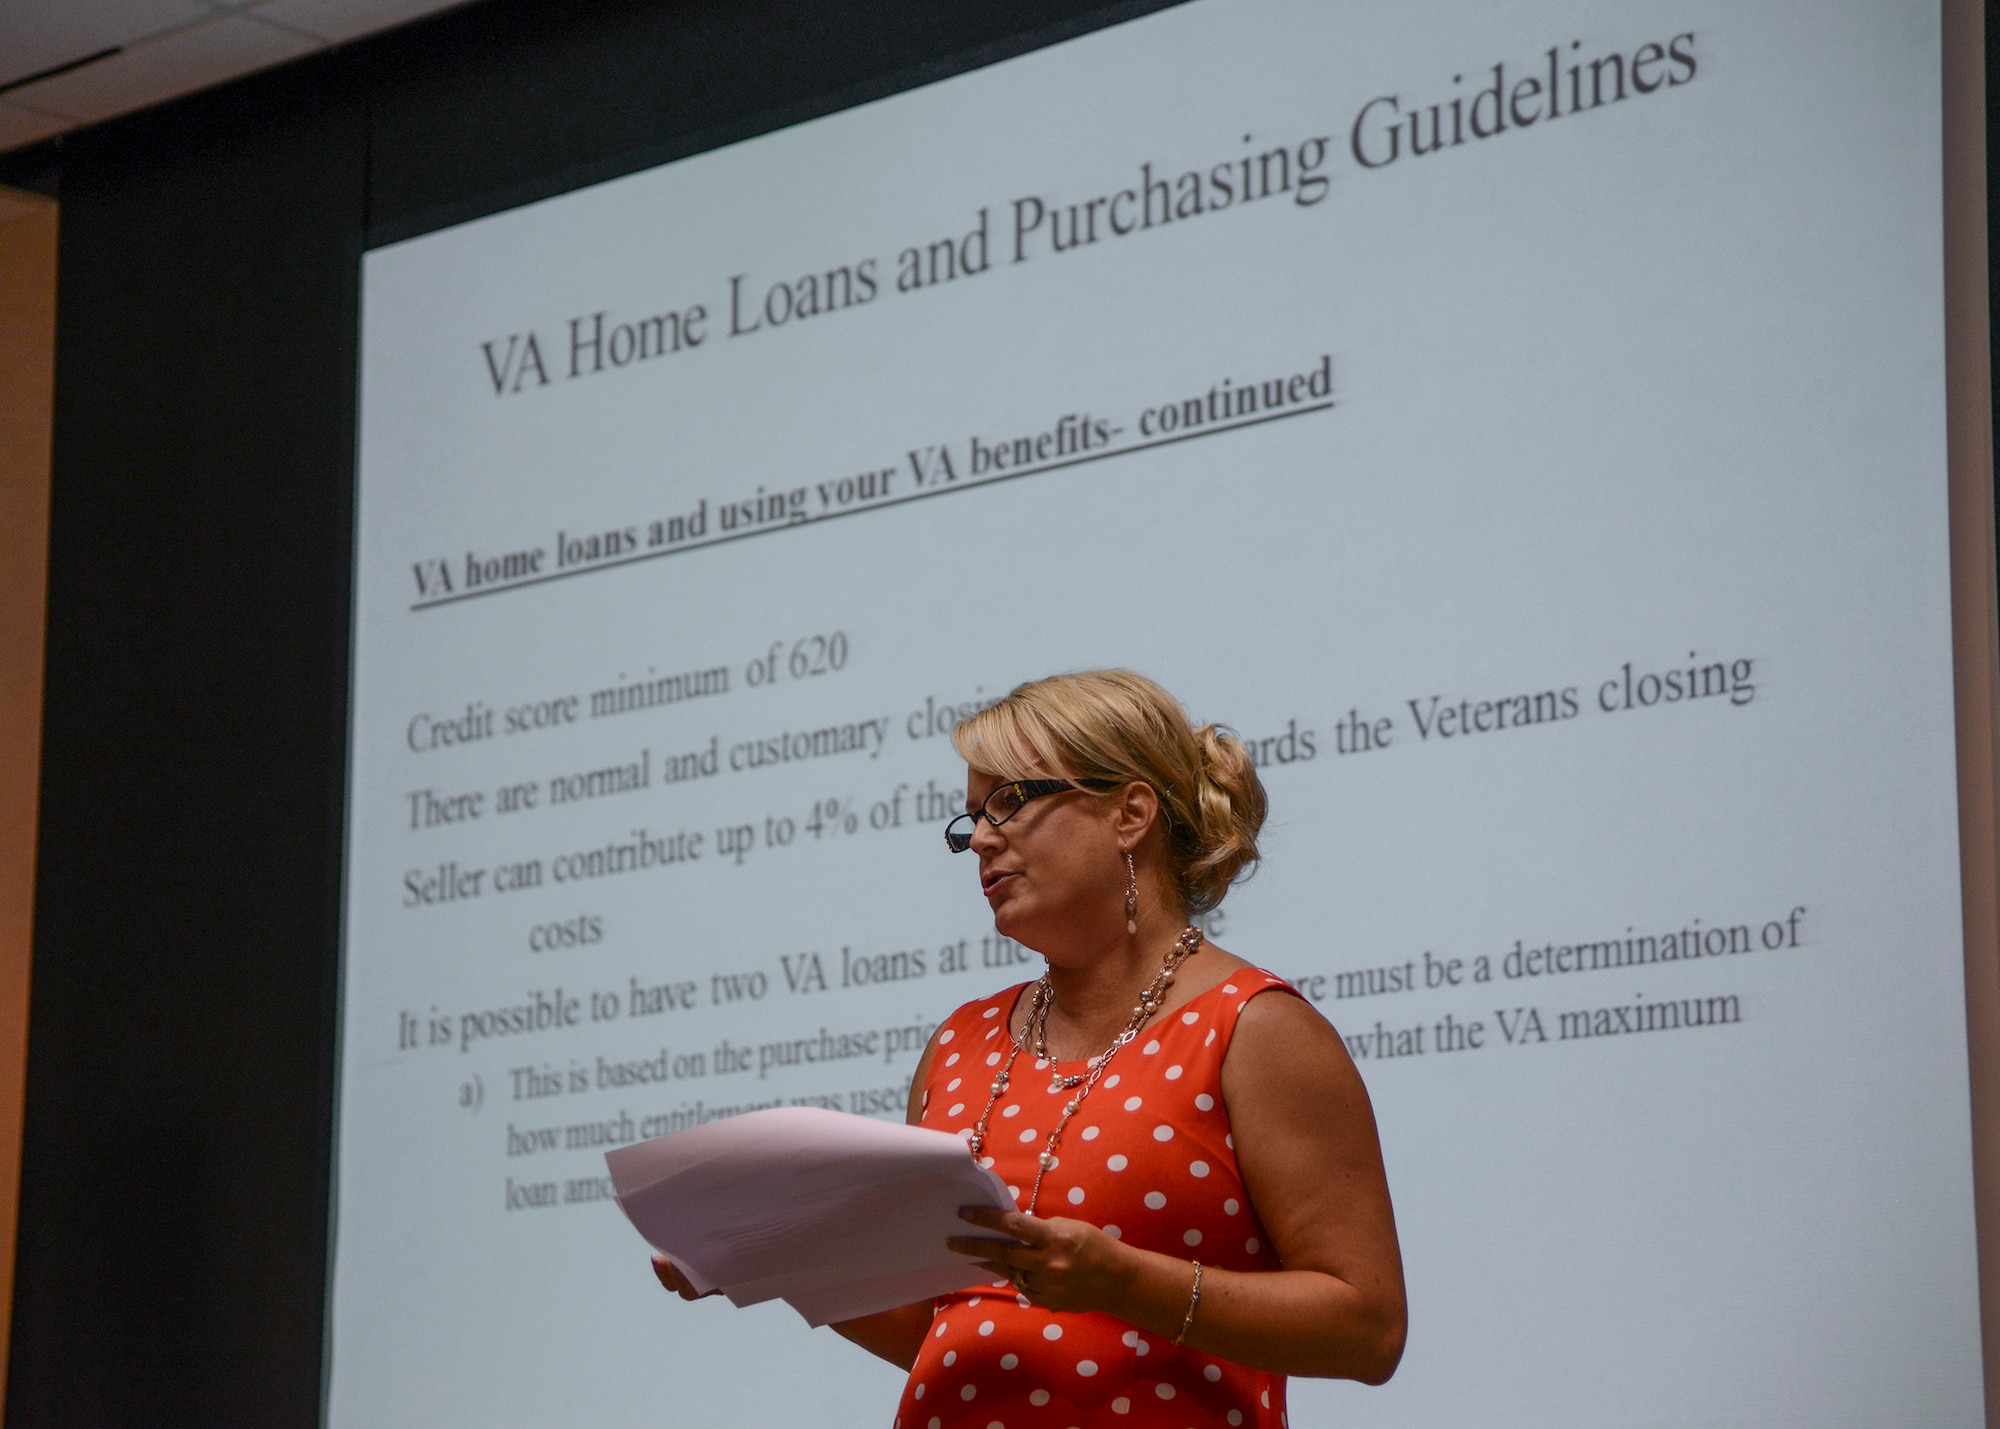 Denise Dee, VA Loan specialist, shares the purchasing guidelines for buying a home using VA financing during a home buyer’s seminar June 17. The seminar was put on by the Edwards Housing Management Office at the Airman and Family Readiness Center. (U.S. Air Force photo by Rebecca Amber)